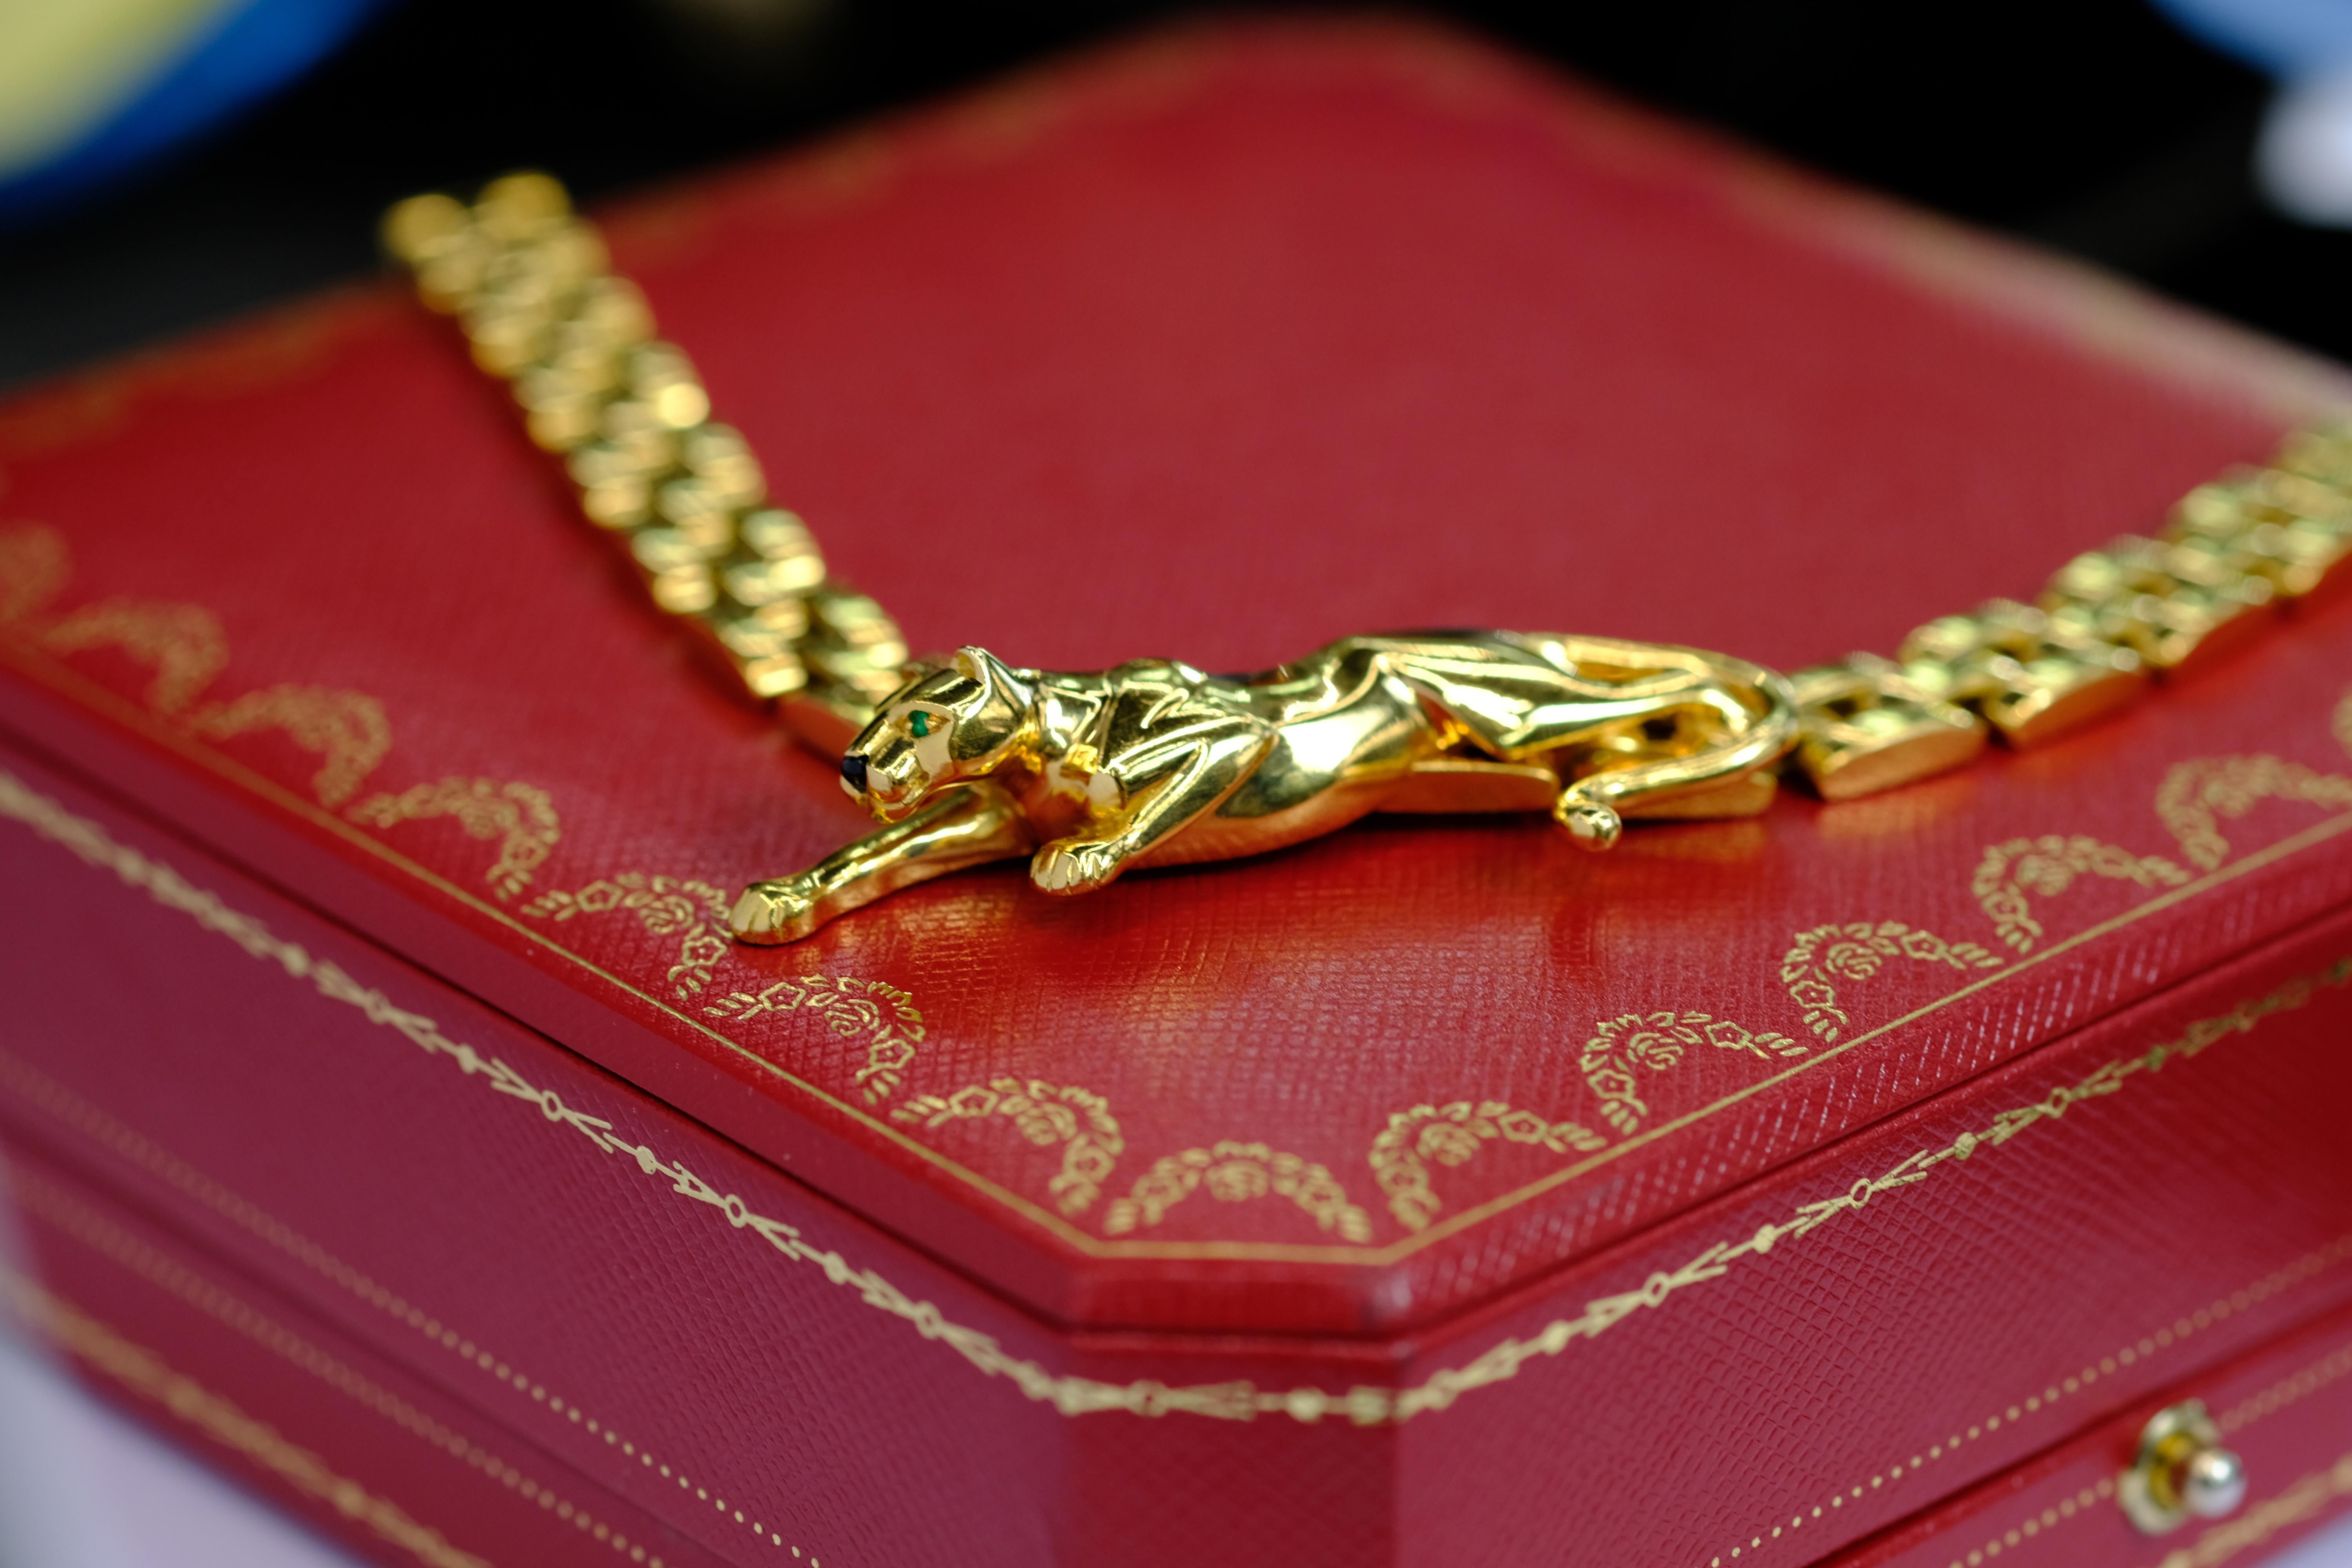 Cartier 18K Yellow Gold Maillon Panthere Link Chain Vintage Necklace For Sale 4